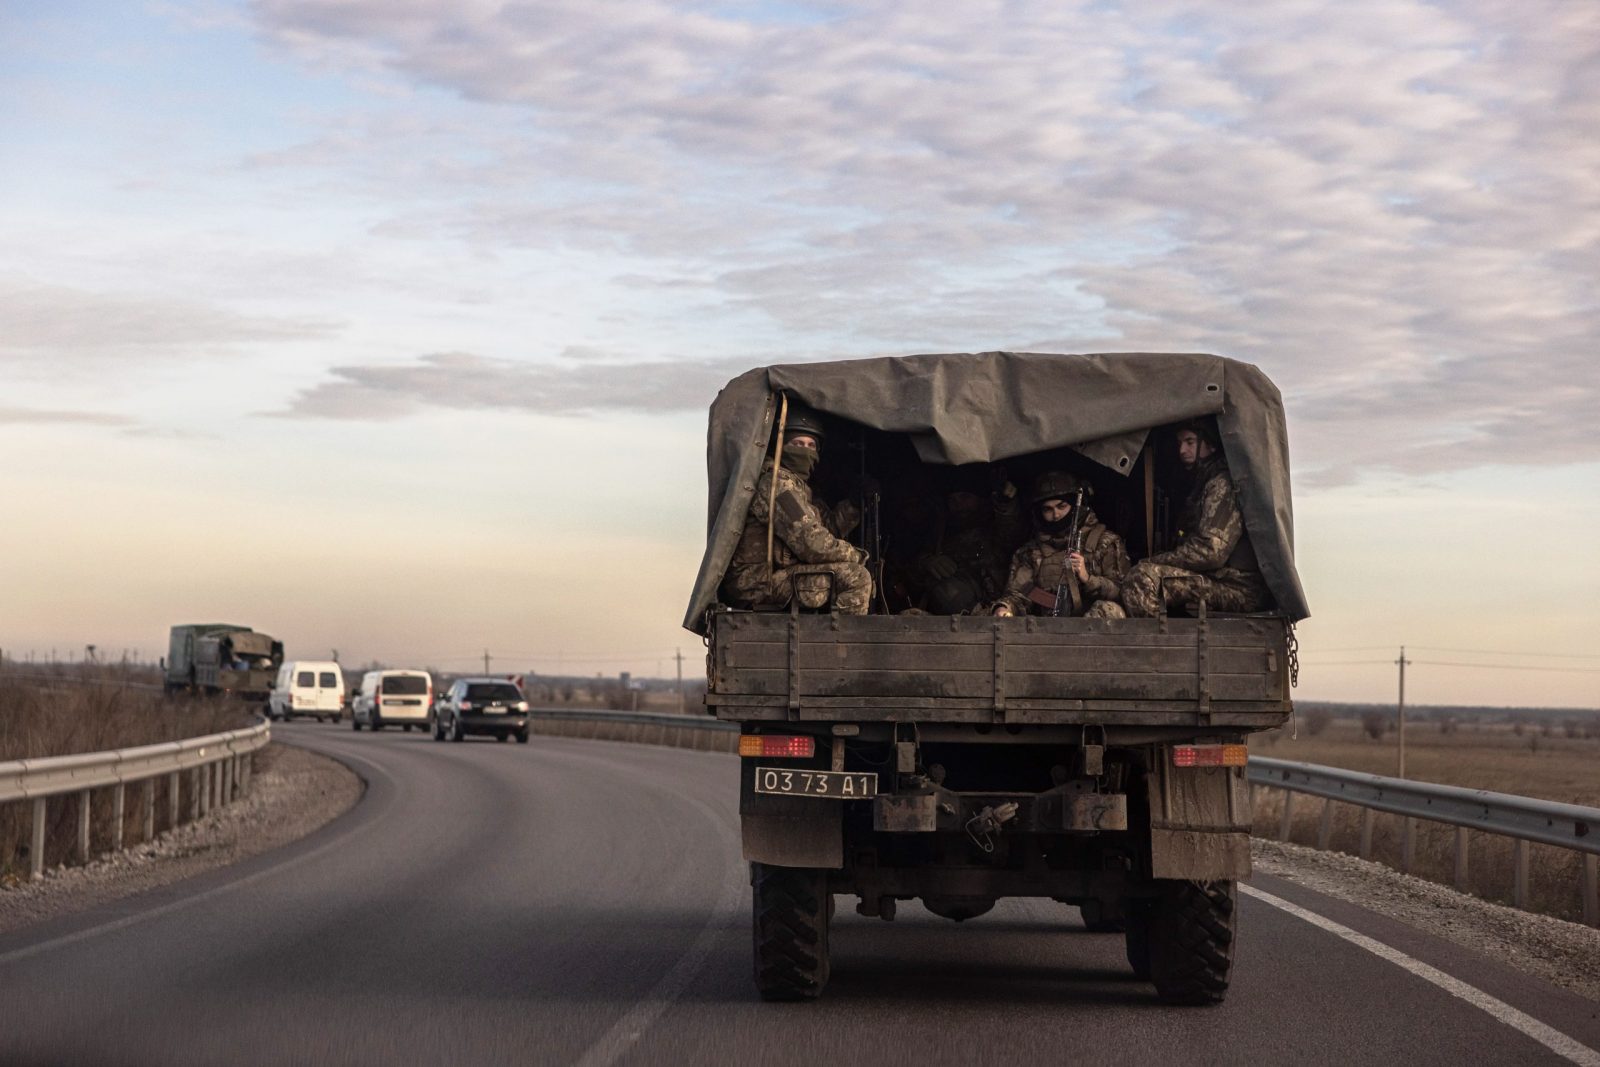 epa10342326 Ukrainian soldiers ride in a military truck in the Dnipropetrovsk region on the road to the Donetsk area, Ukraine, 01 December 2022, amid Russian invasion. Russian troops entered Ukraine on 24 February 2022 starting a conflict that has provoked destruction and a humanitarian crisis.  EPA/ROMAN PILIPEY